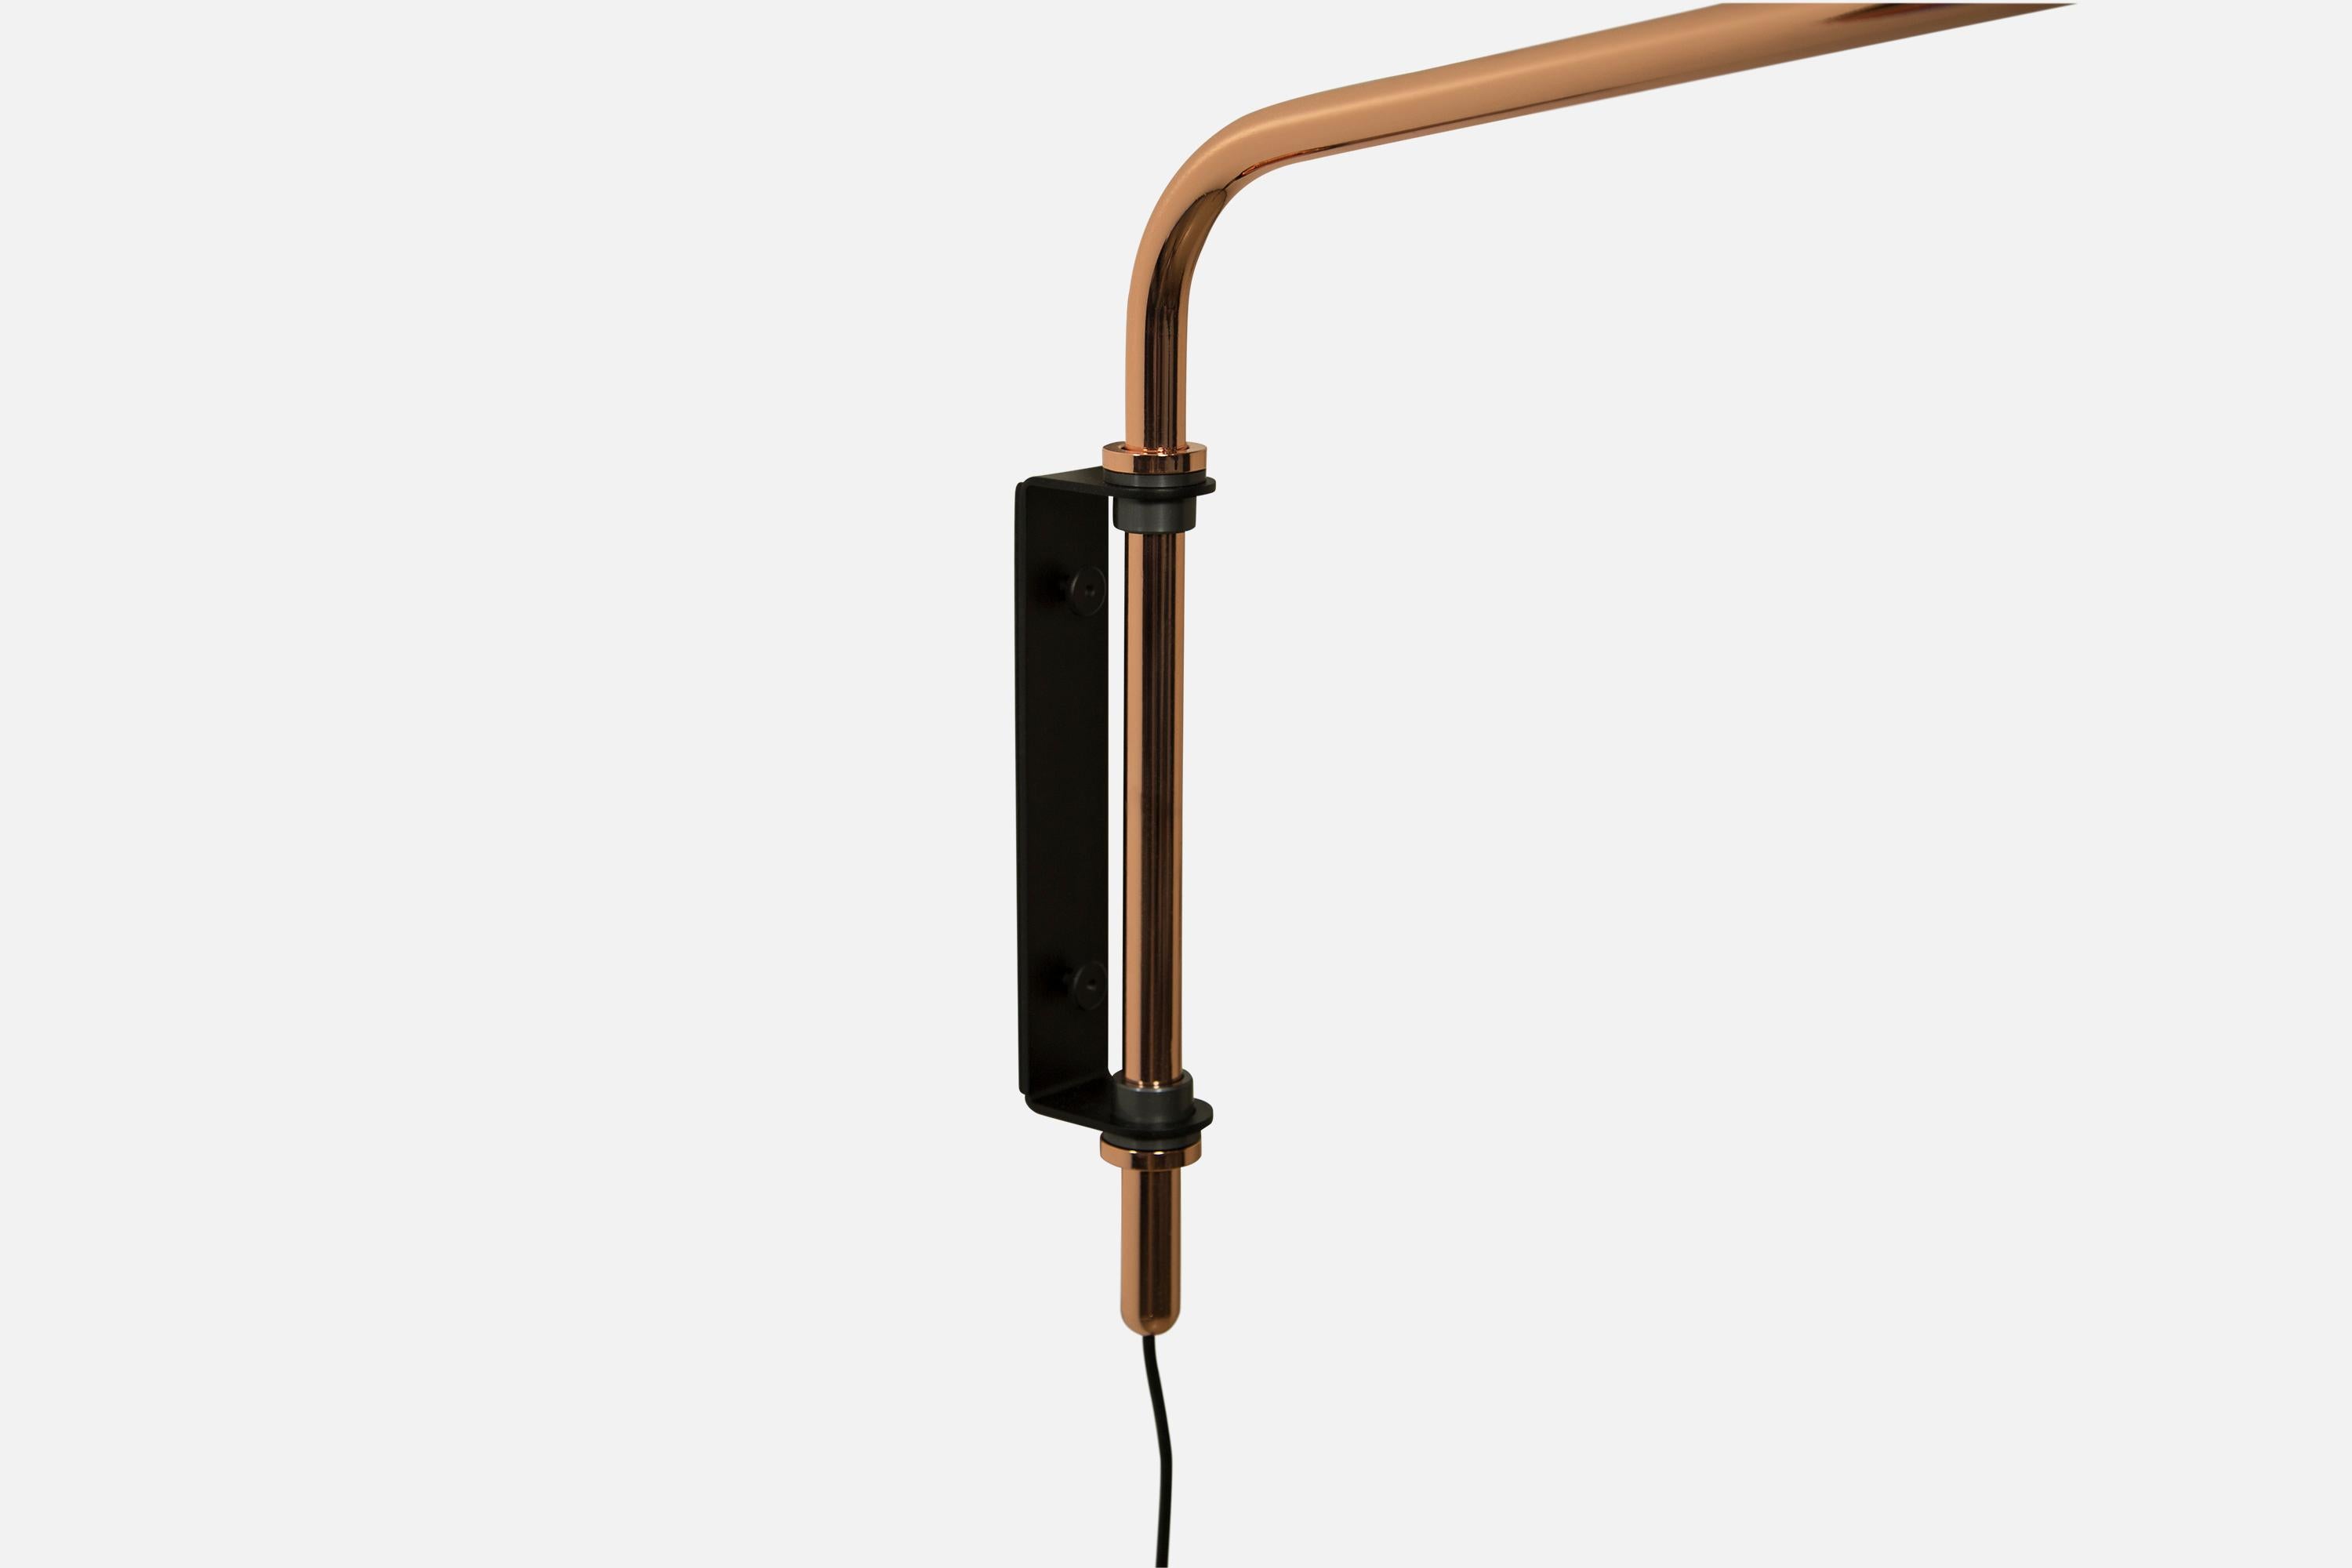 Modern Signal Arm Sconce in White x Copper, Long, Hardwire, by Souda, Made to Order For Sale